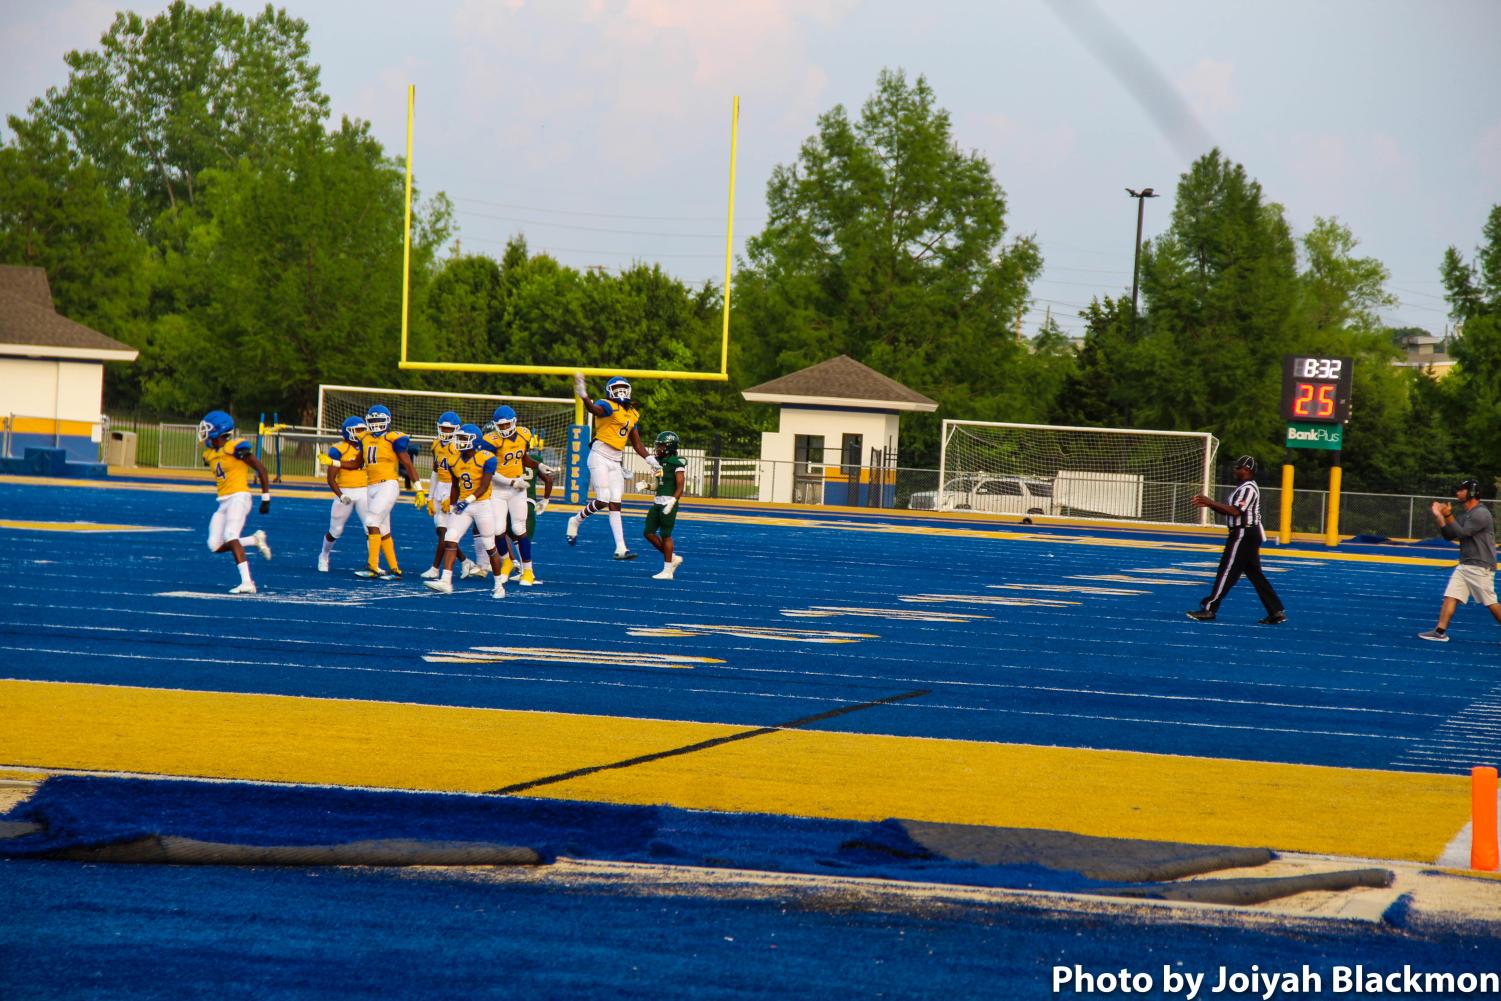 Spring+Game%3A+Tupelo+Football+vs+West+Point